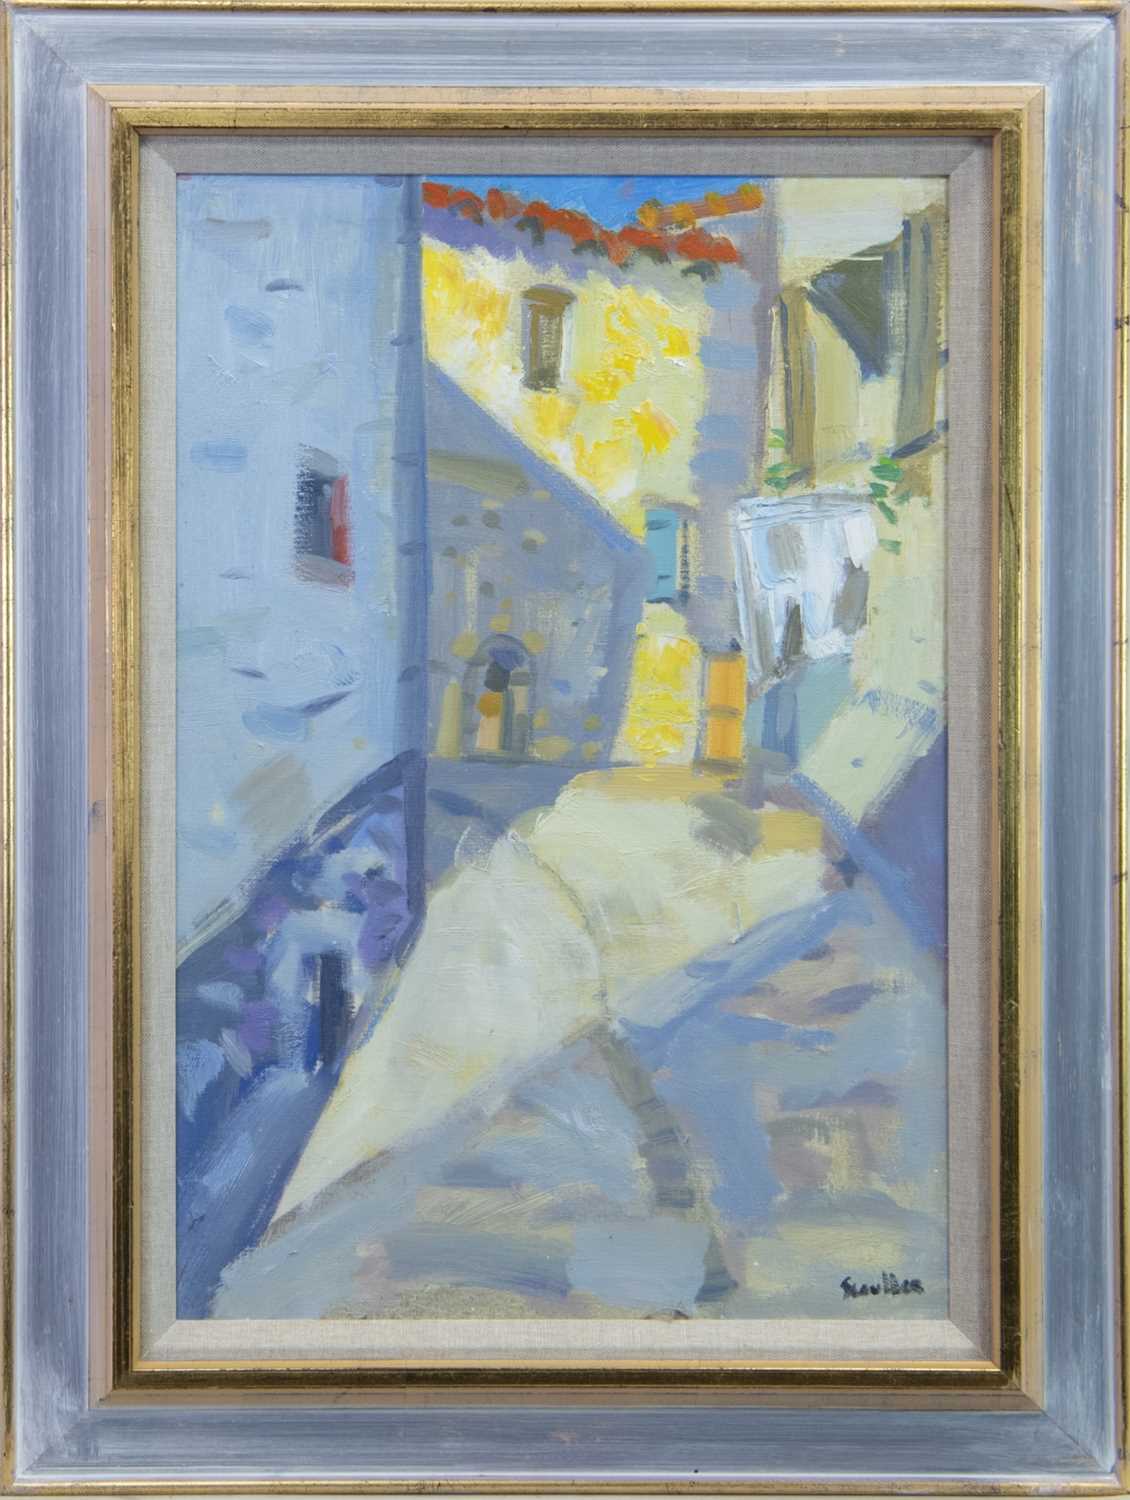 Lot 512 - AFTERNOON SHADOWS, AN OIL BY GLEN SCOULLER